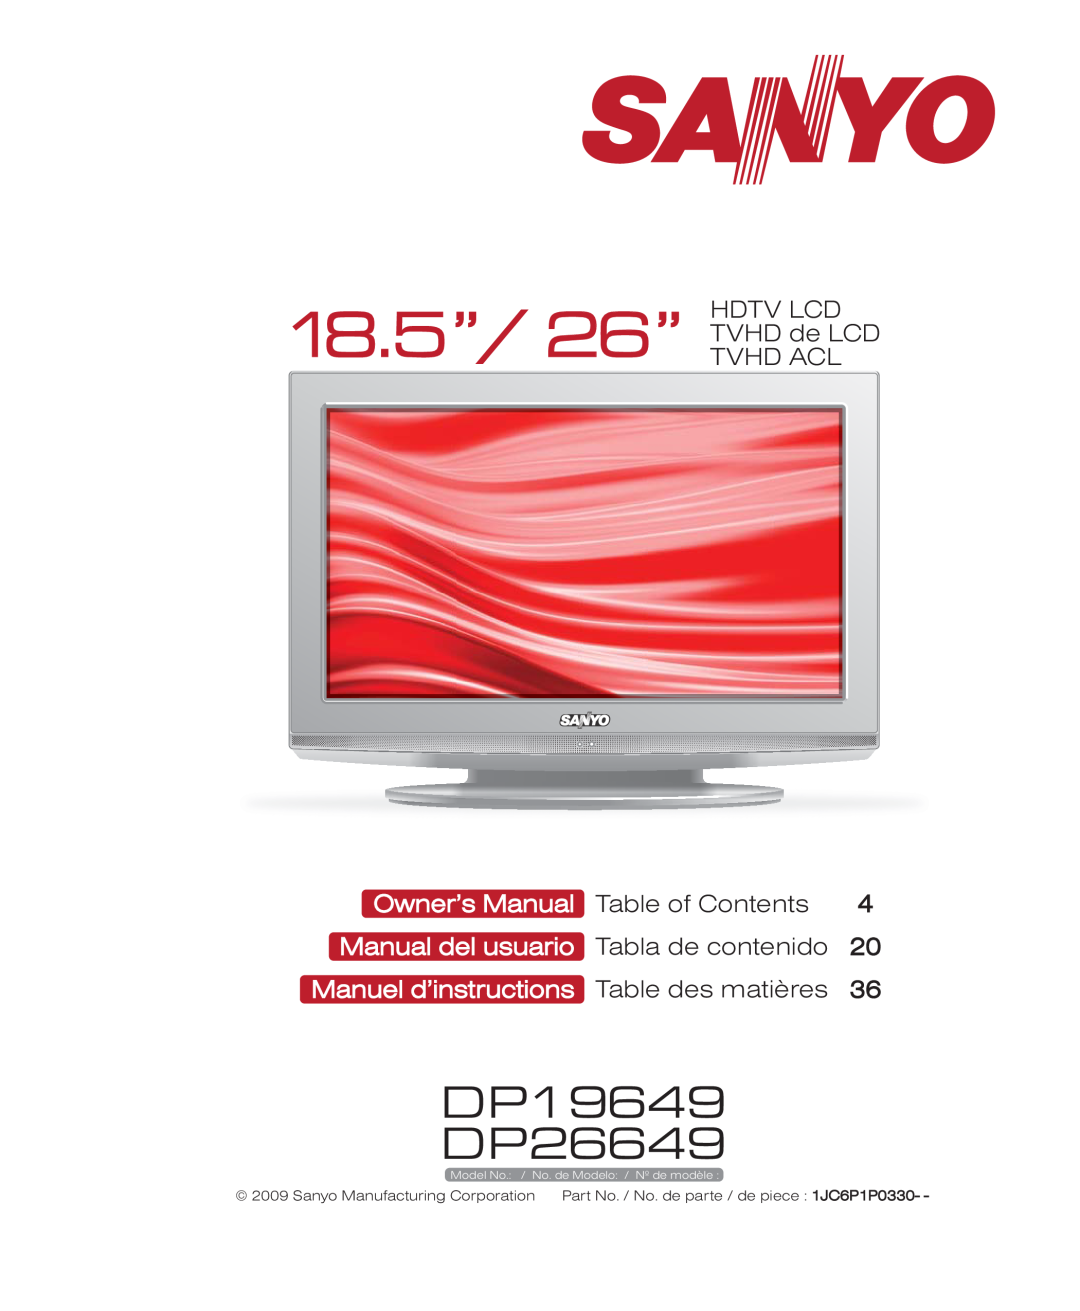 Sanyo owner manual 18.5”, DP19649 DP26649, Hdtv Lcd, 26” TVHD ACL, TVHD de LCD, Owner’s Manual Table of Contents 